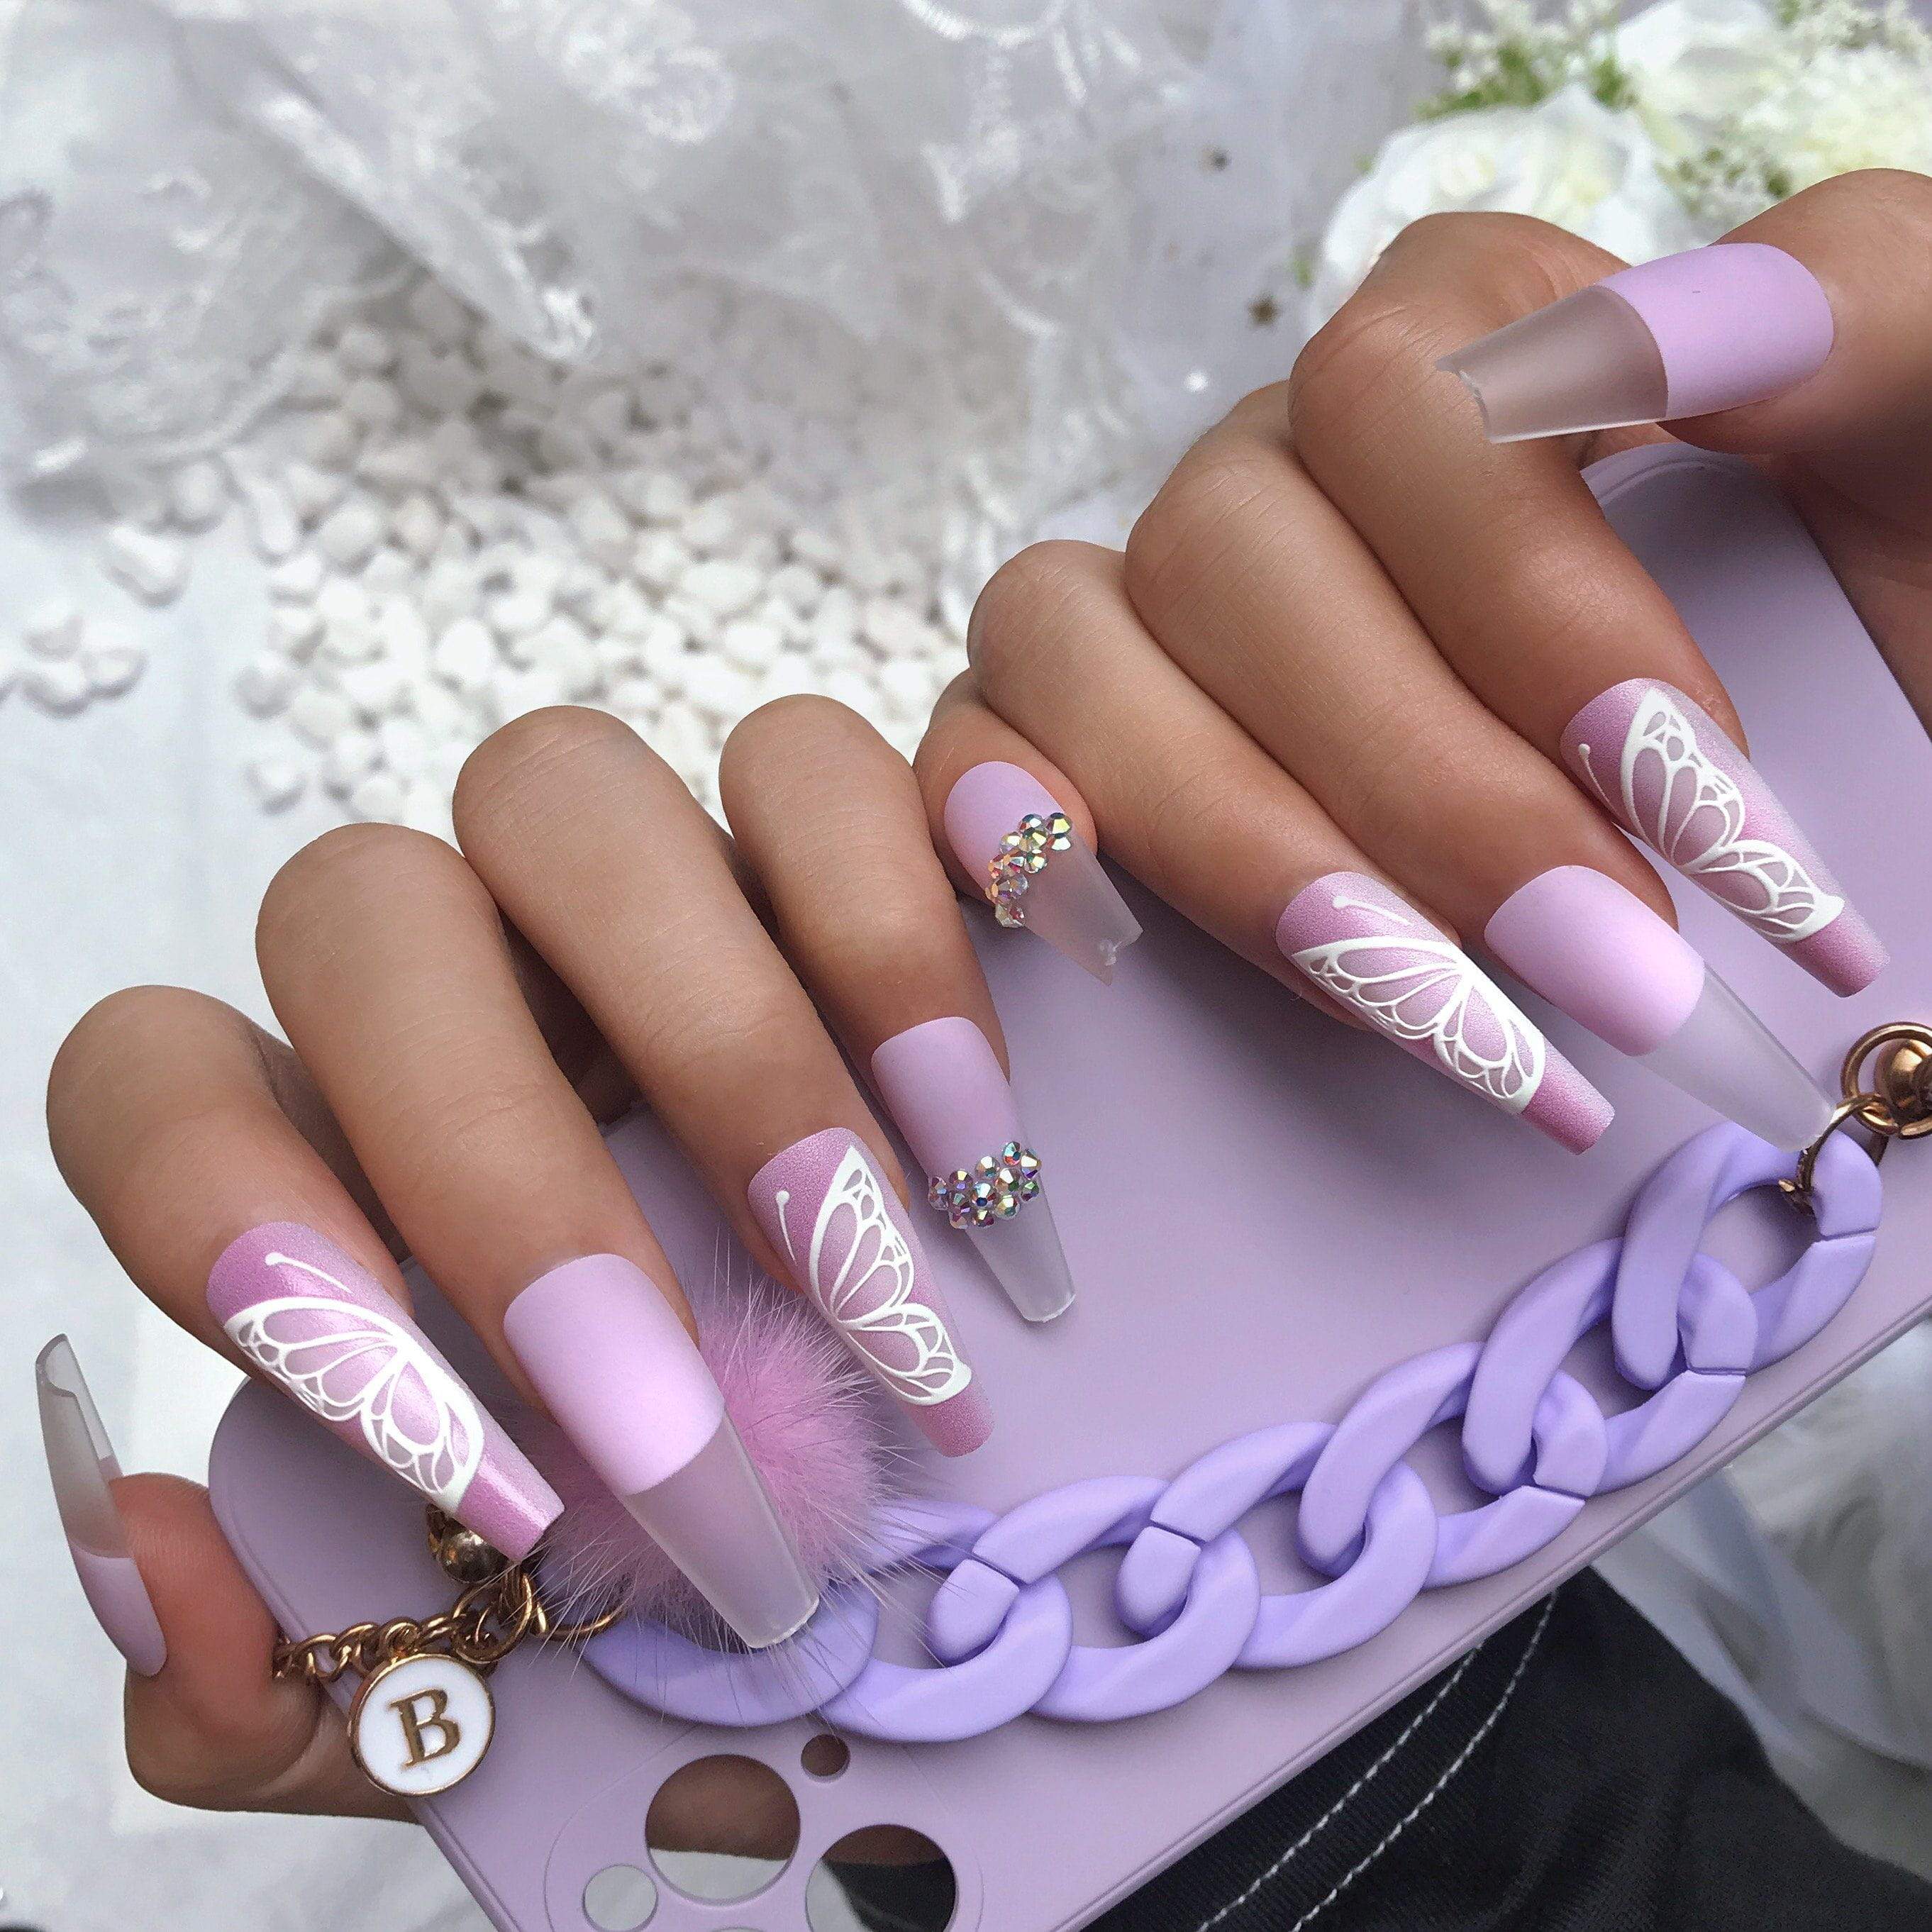 Christmas Decoration Fofosbeauty 24pcs Press on False Nails, Long Coffin  Fake Nails, Pearl Butterfly Rosy French 